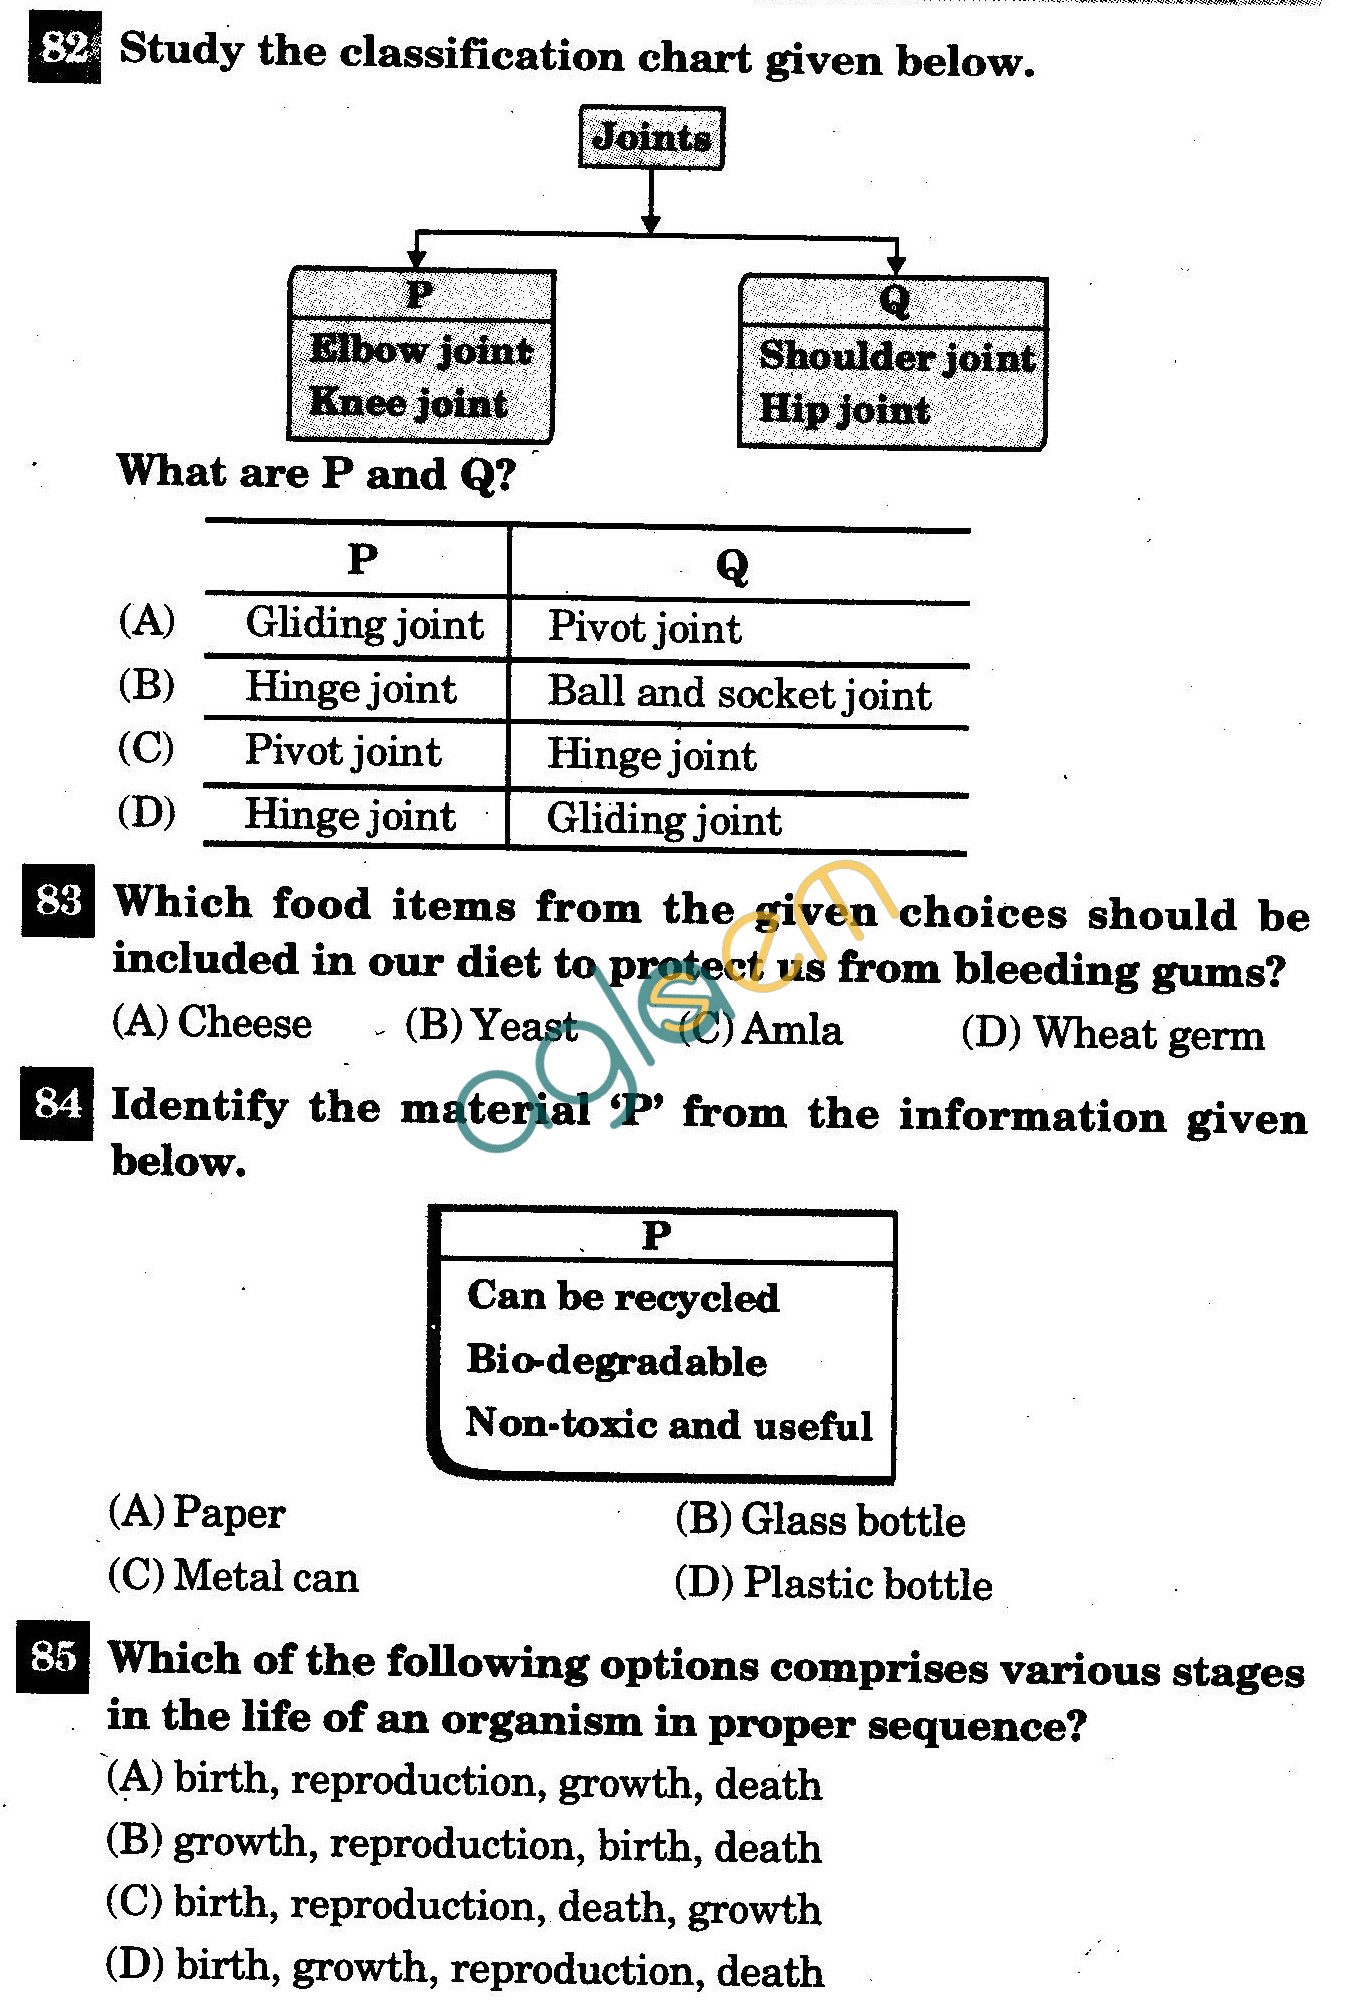 NSTSE 2011: Class VI Question Paper with Answers - Biology